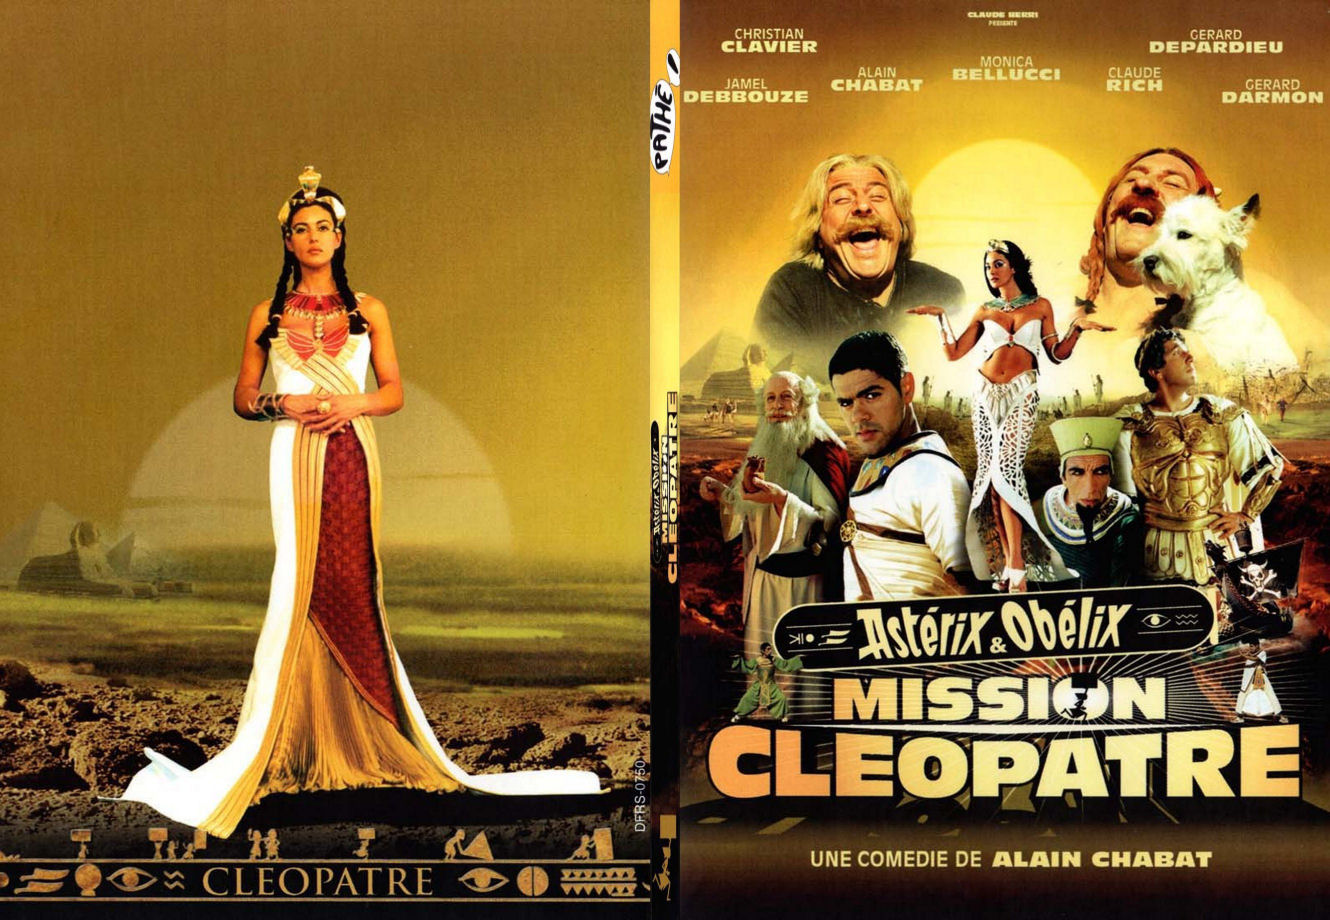 Asterix & Obelix: Mission Cleopatra Pics, Movie Collection